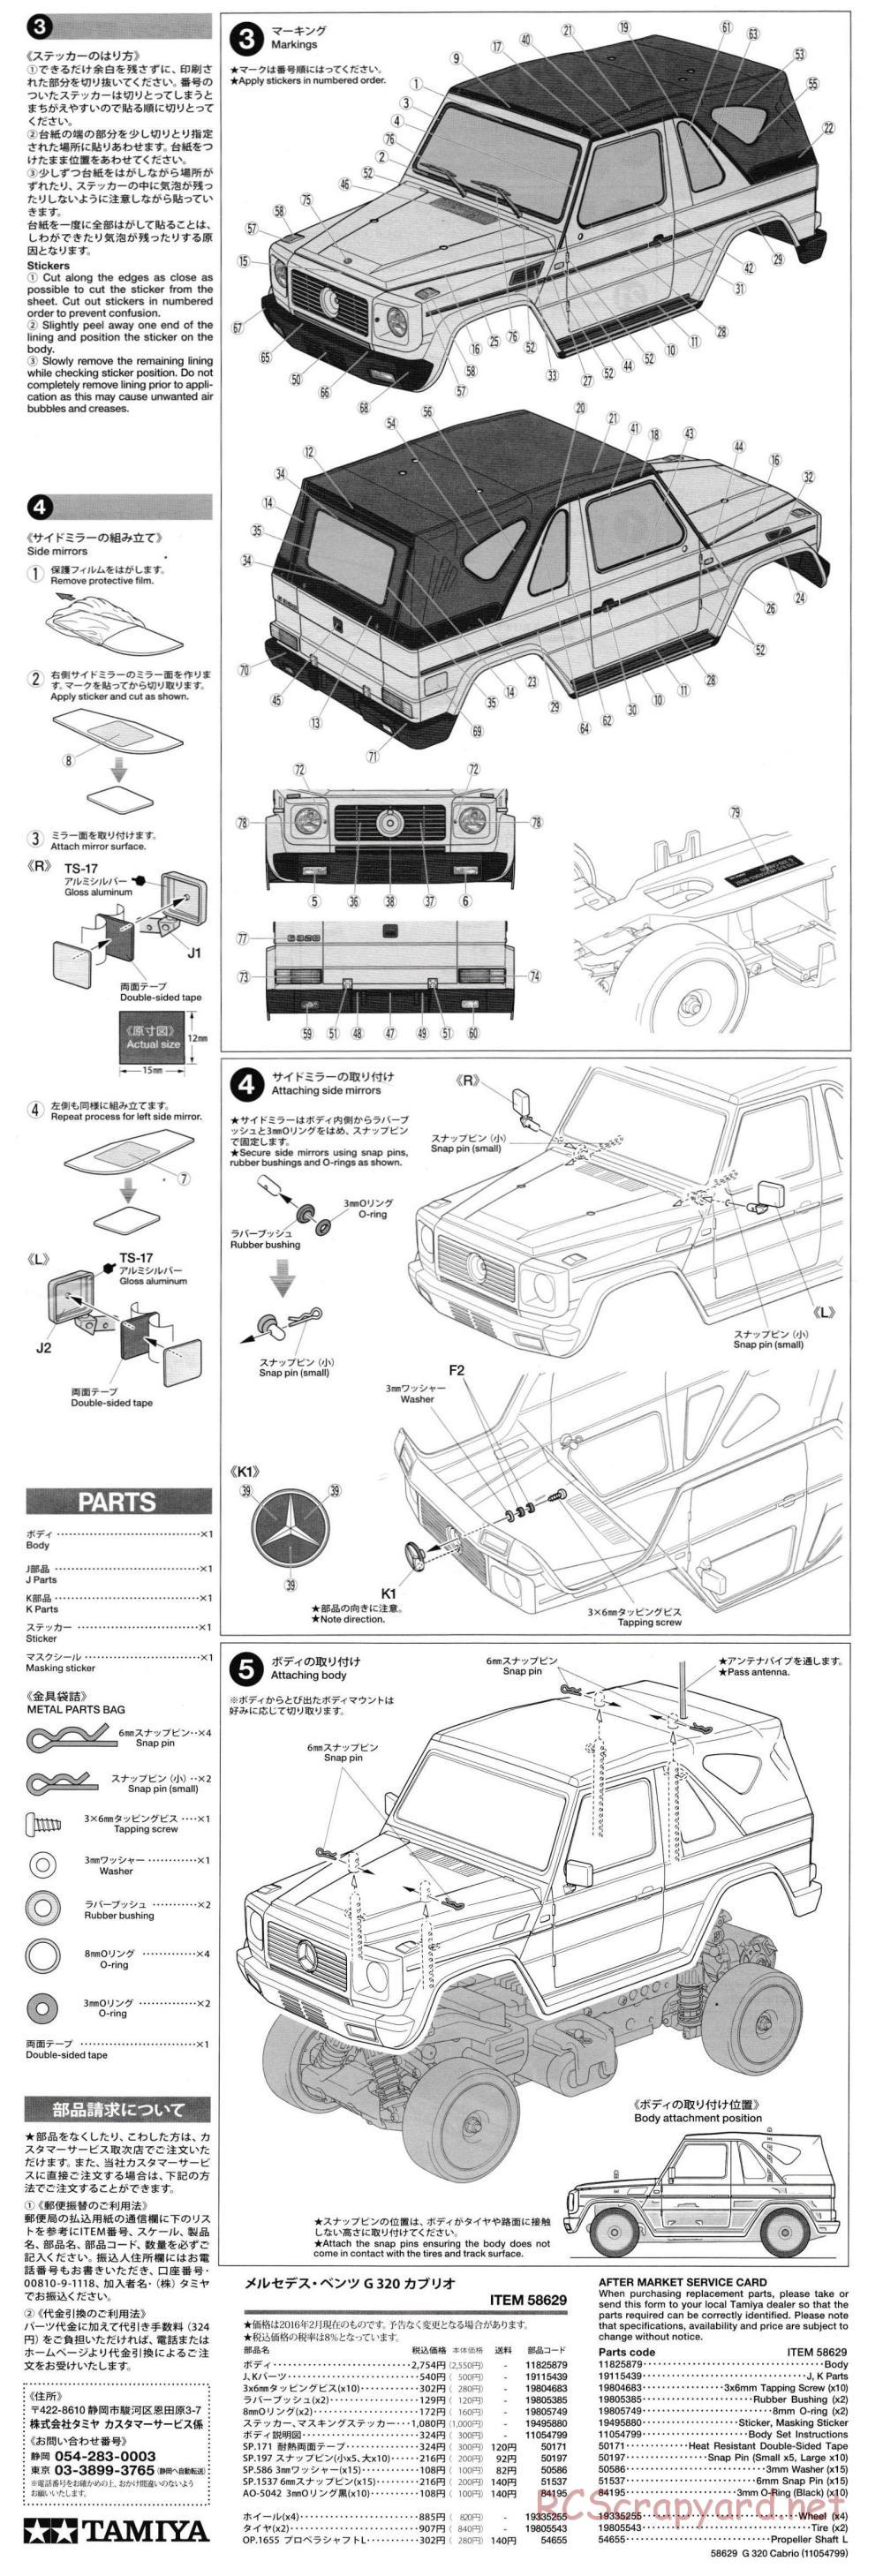 Tamiya - Mercedes Benz G-320 Cabrio - MF-01X Chassis - Body Manual - Page 2